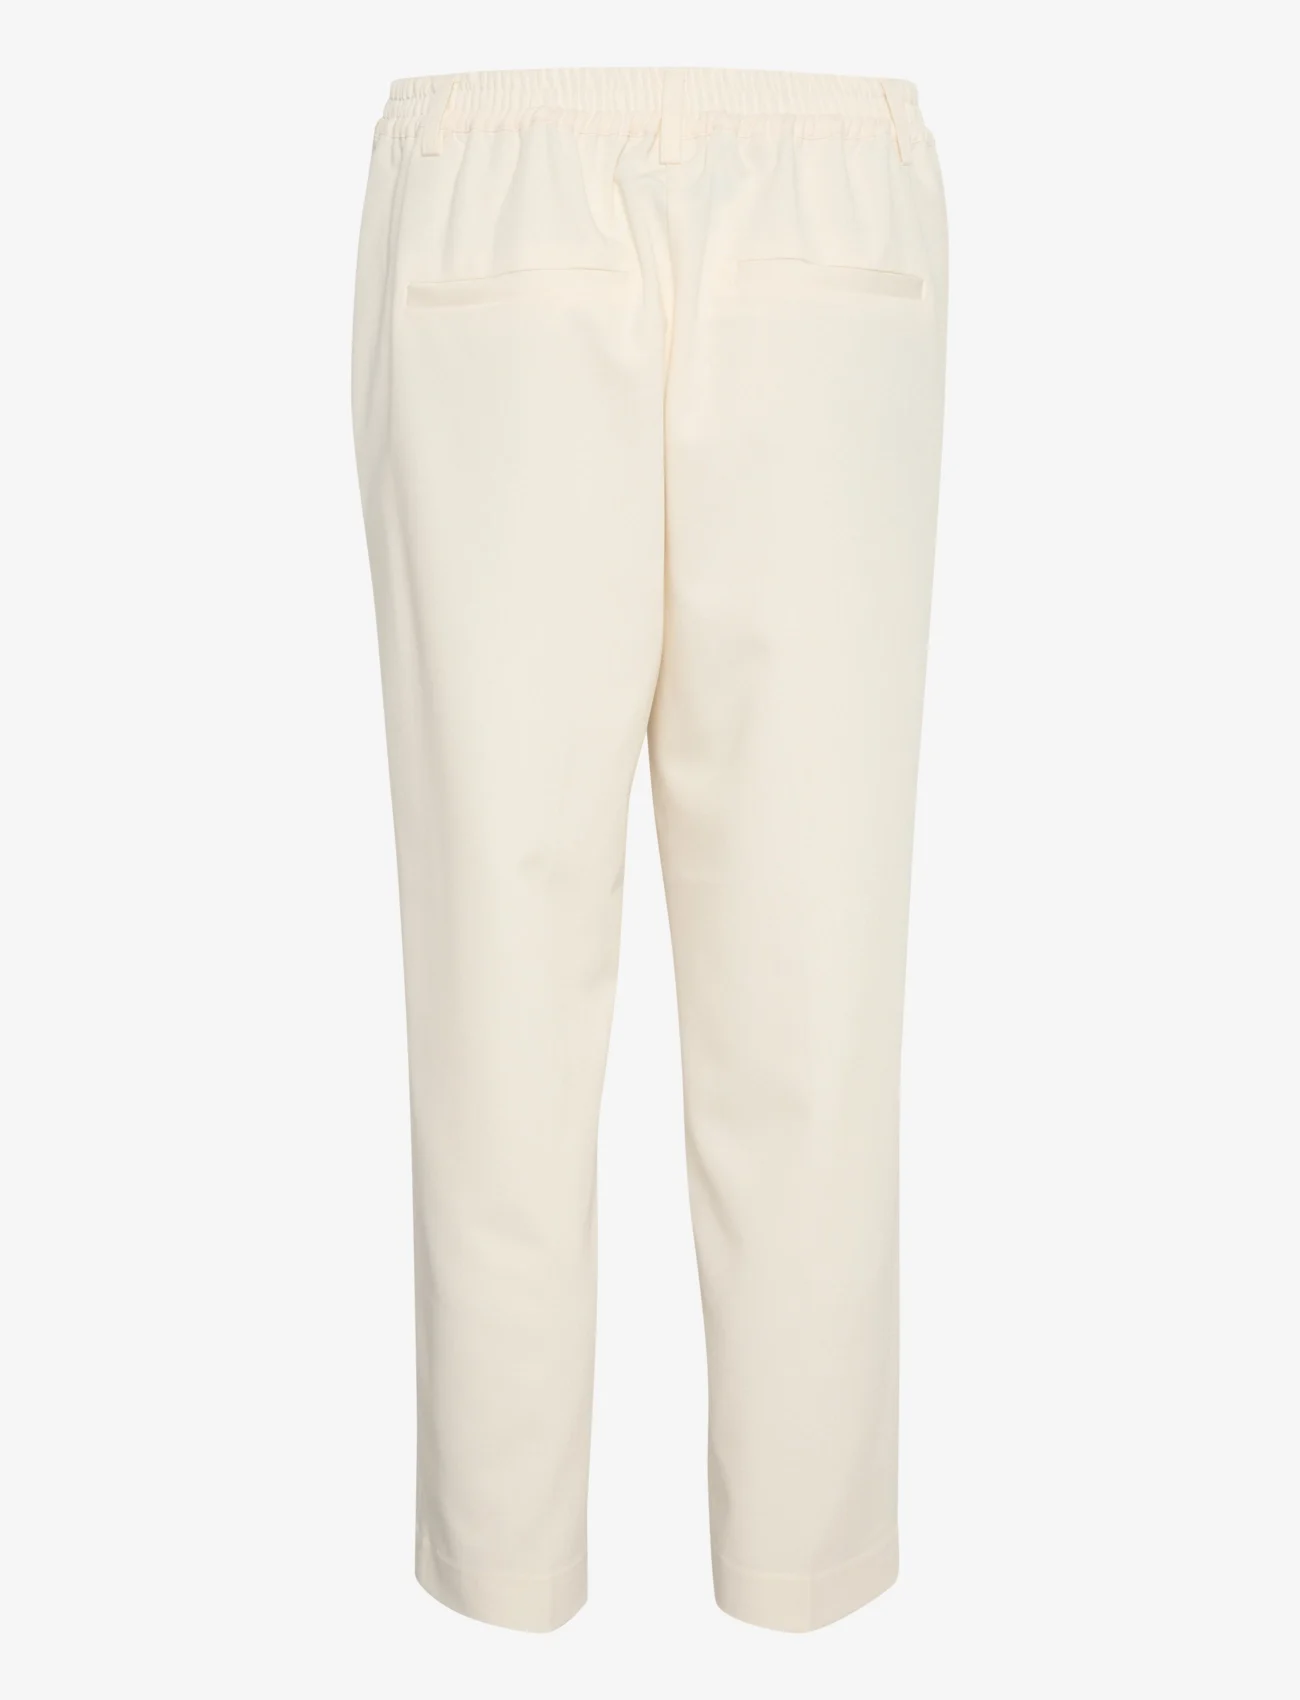 Kaffe - KAsakura HW Cropped Pants - party wear at outlet prices - antique white - 1